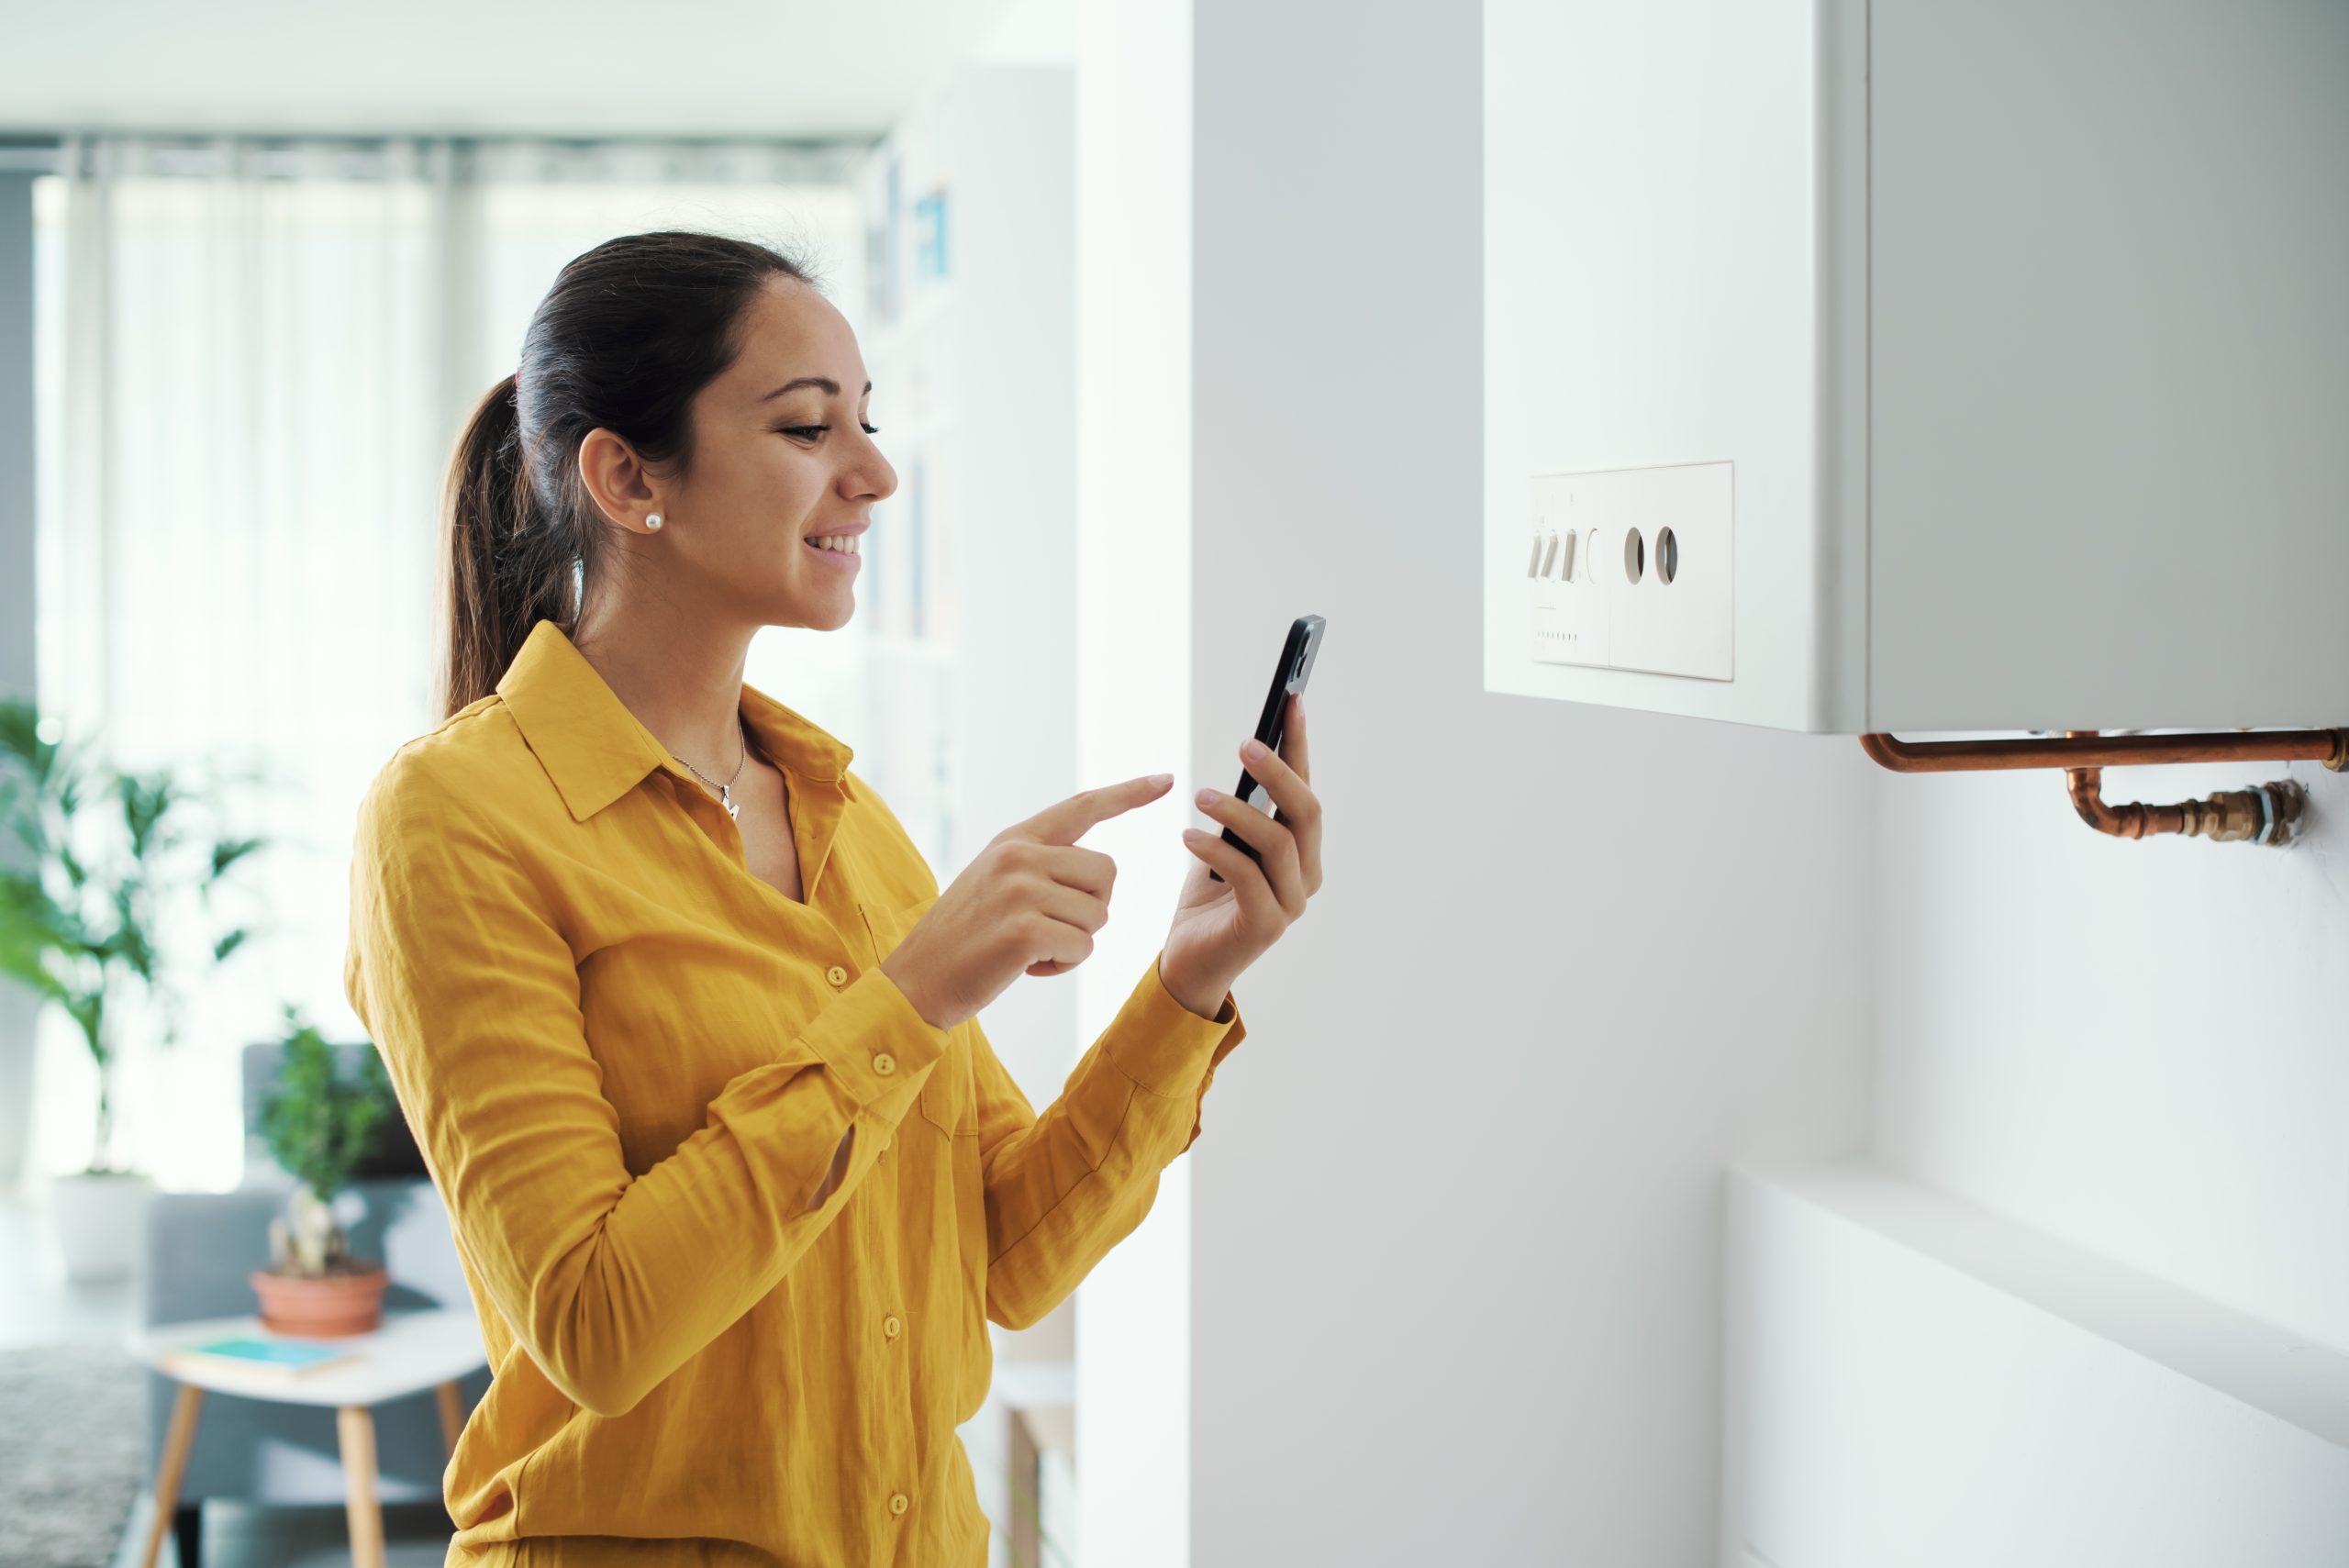 Woman in a yellow shirt using her phone to control boiler and smiling